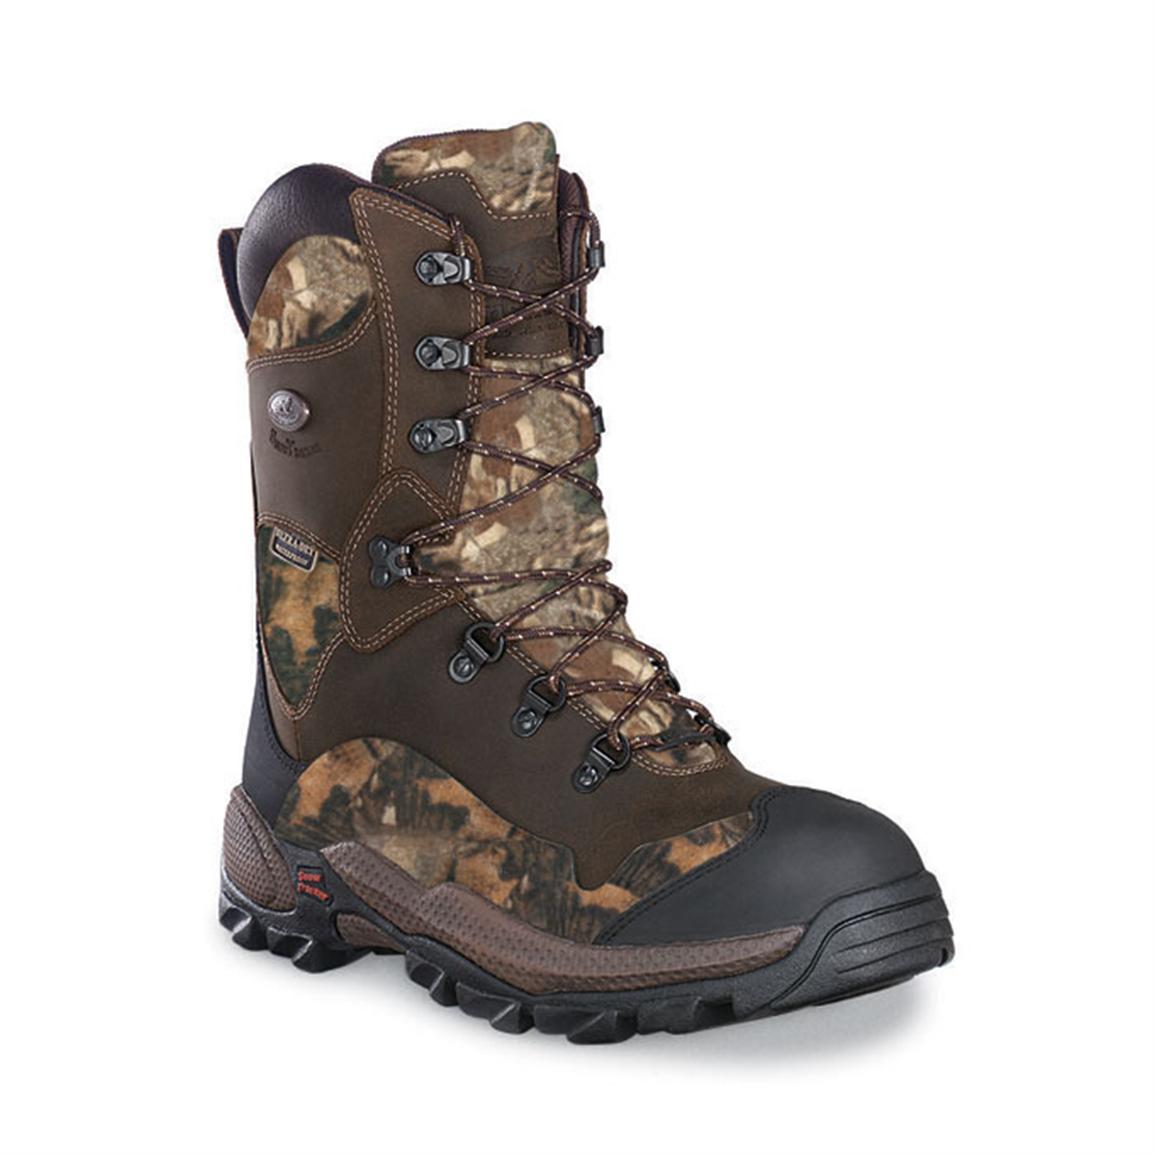 Snow Tracker Pac Boots, Brown 